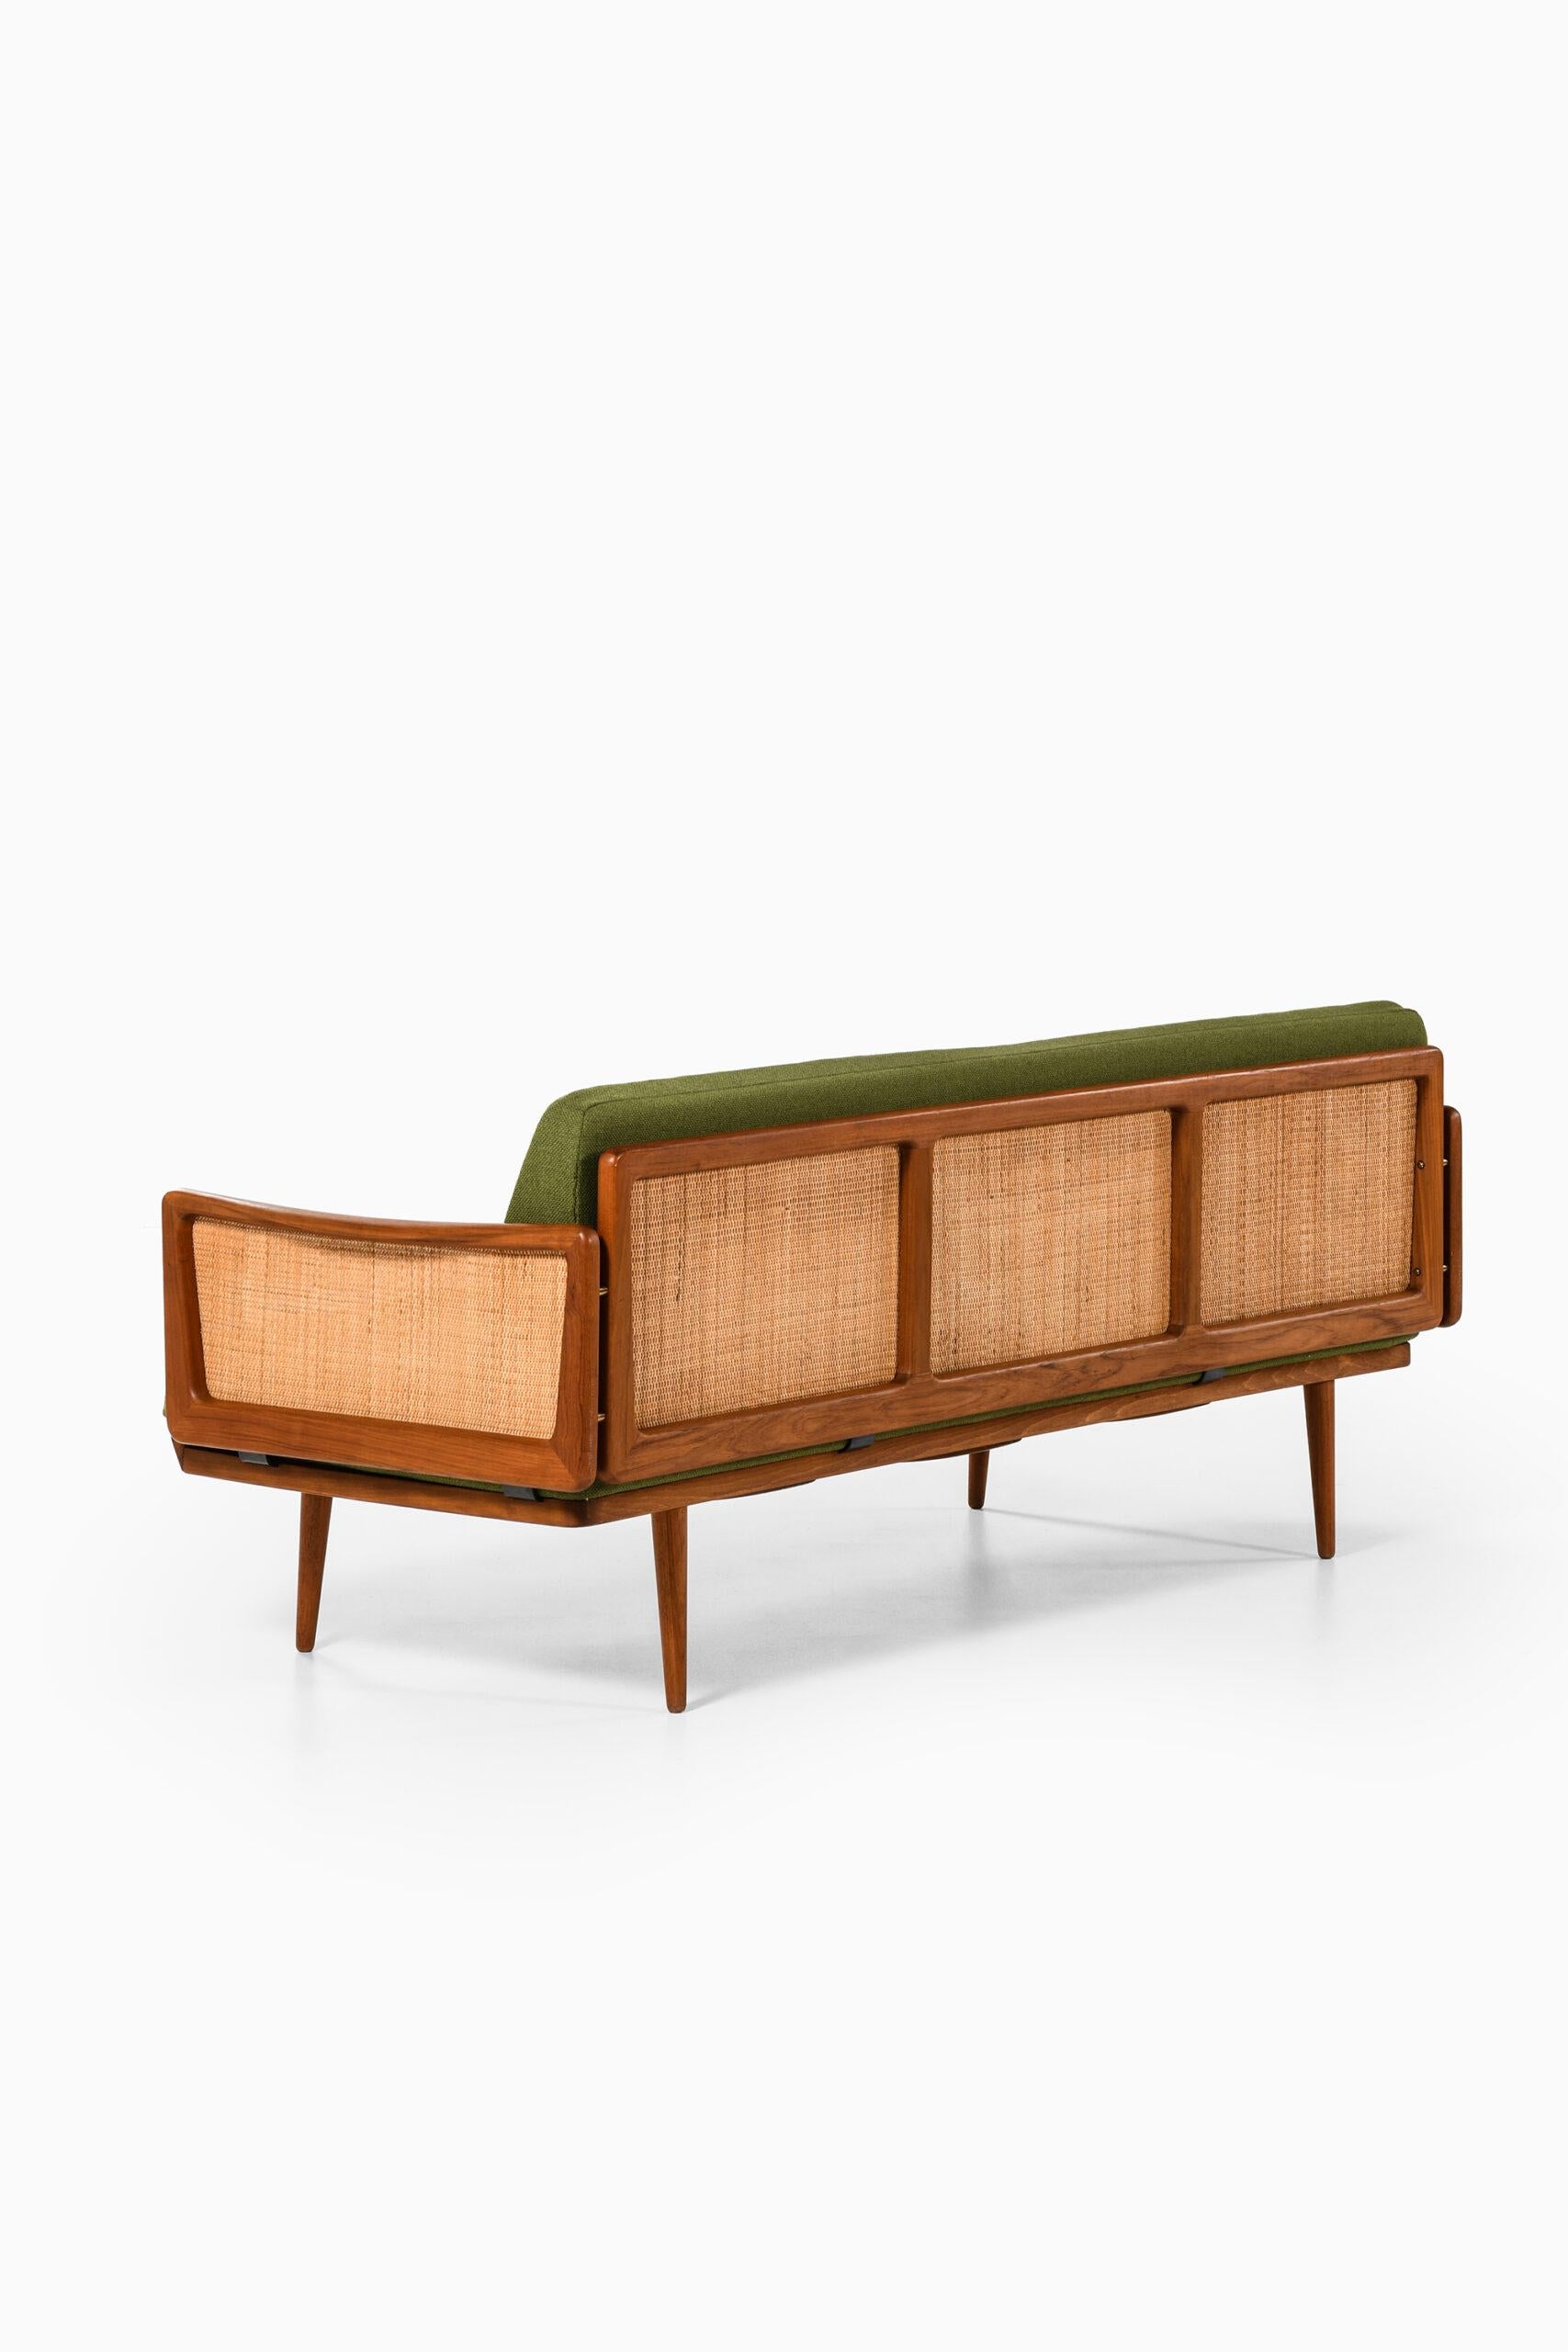 Mid-20th Century Peter Hvidt & Orla Mølgaard-Nielsen Daybed / Sofa Produced by France & Son For Sale